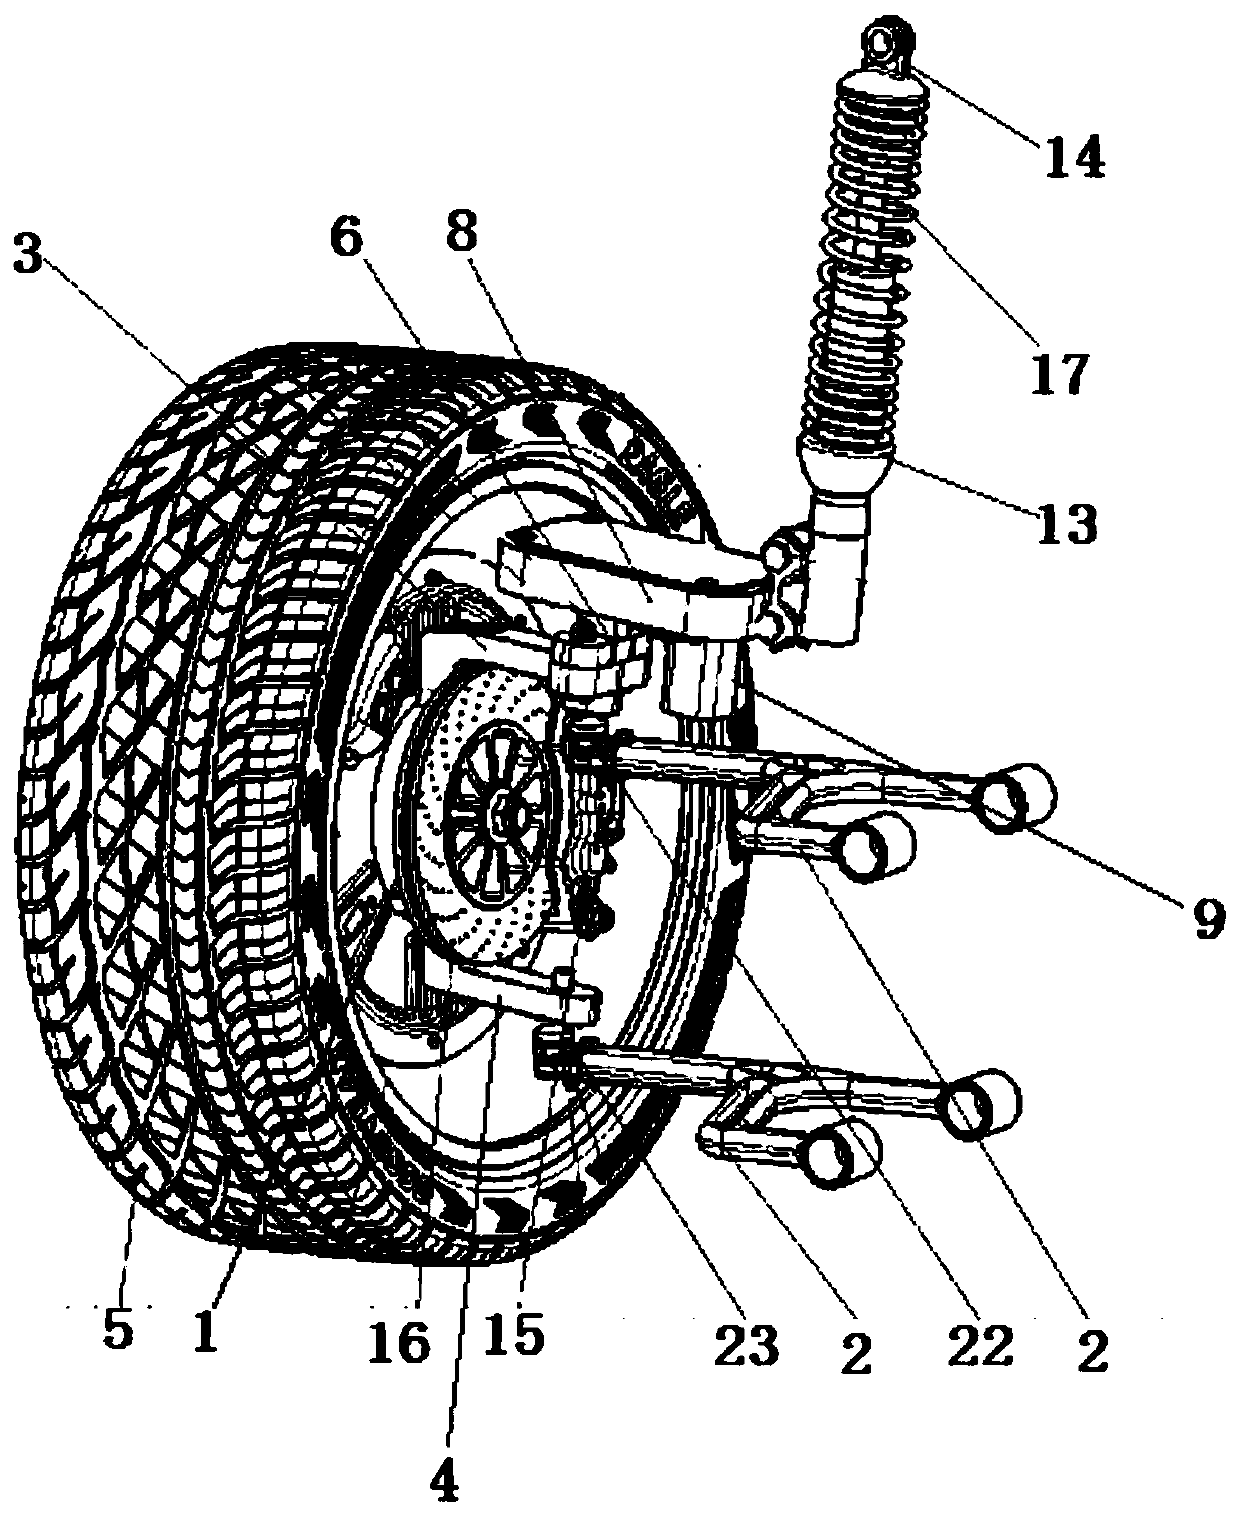 Double-fork-arm suspension structure capable of steering in all directions based on hub motor